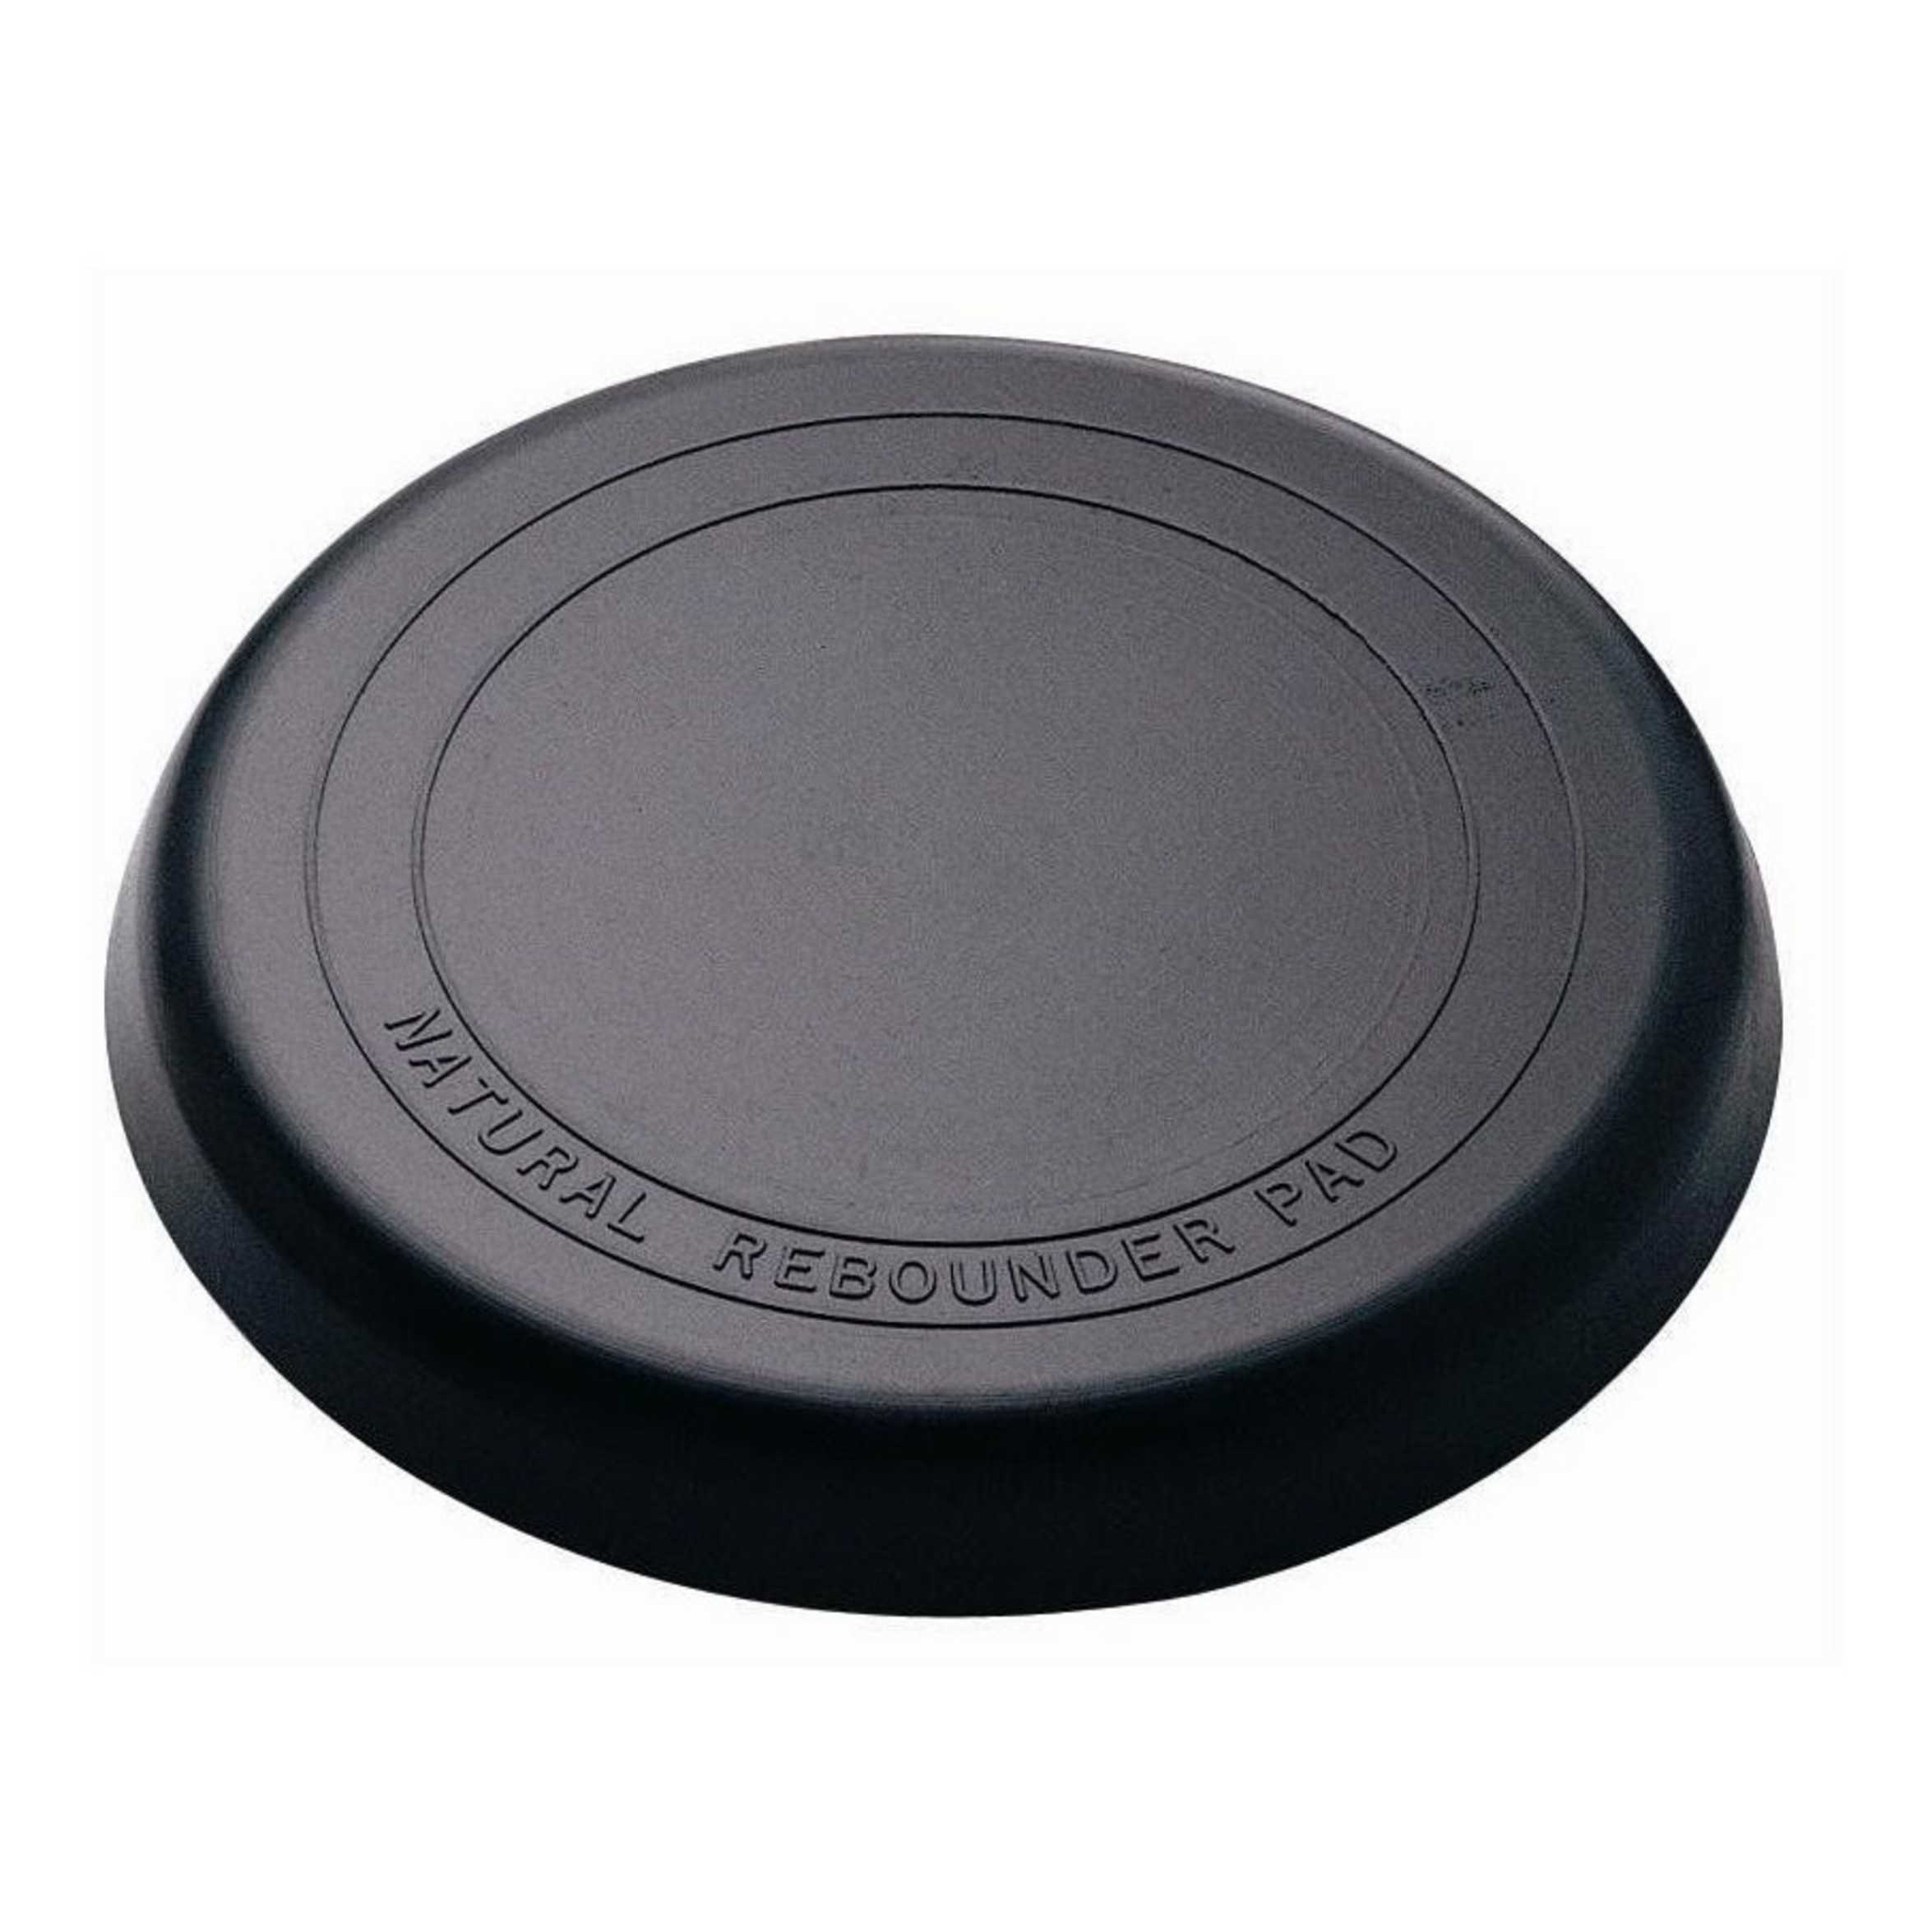 Stagg Billy Hyde 8" Black Rubber Practice Pad